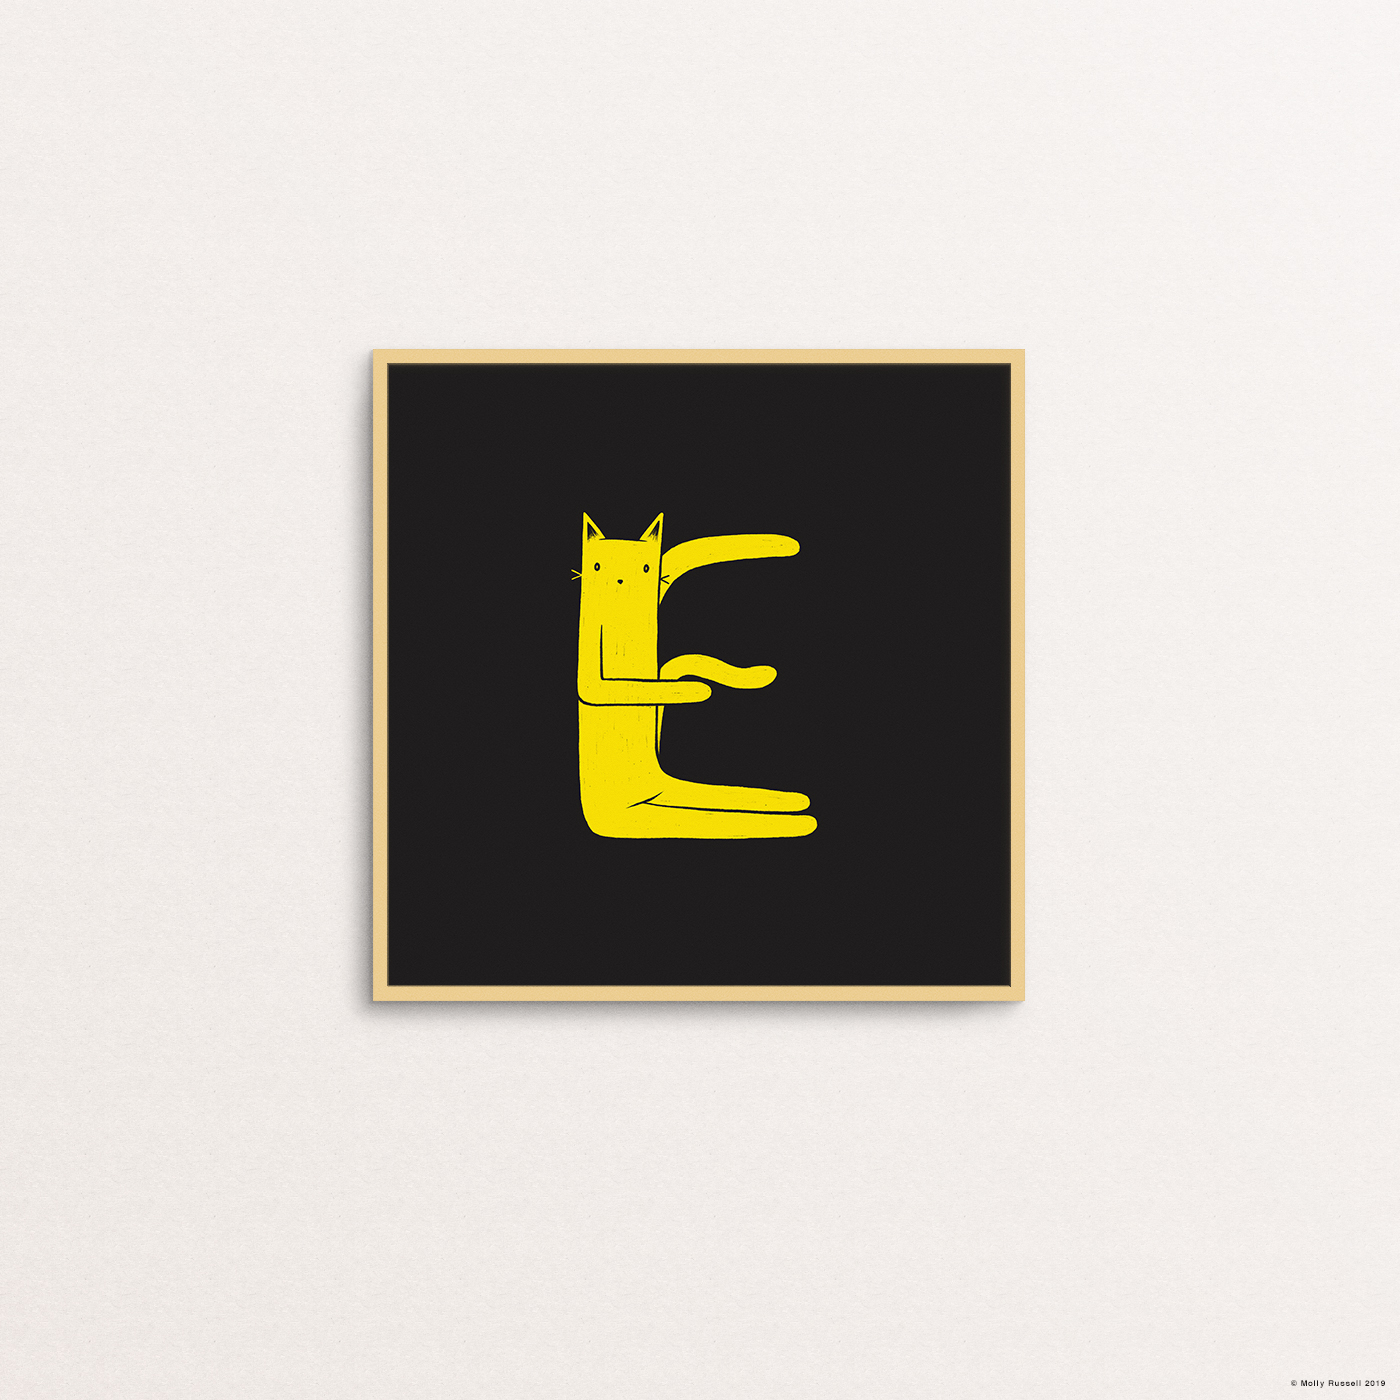 E is for Eleanor.